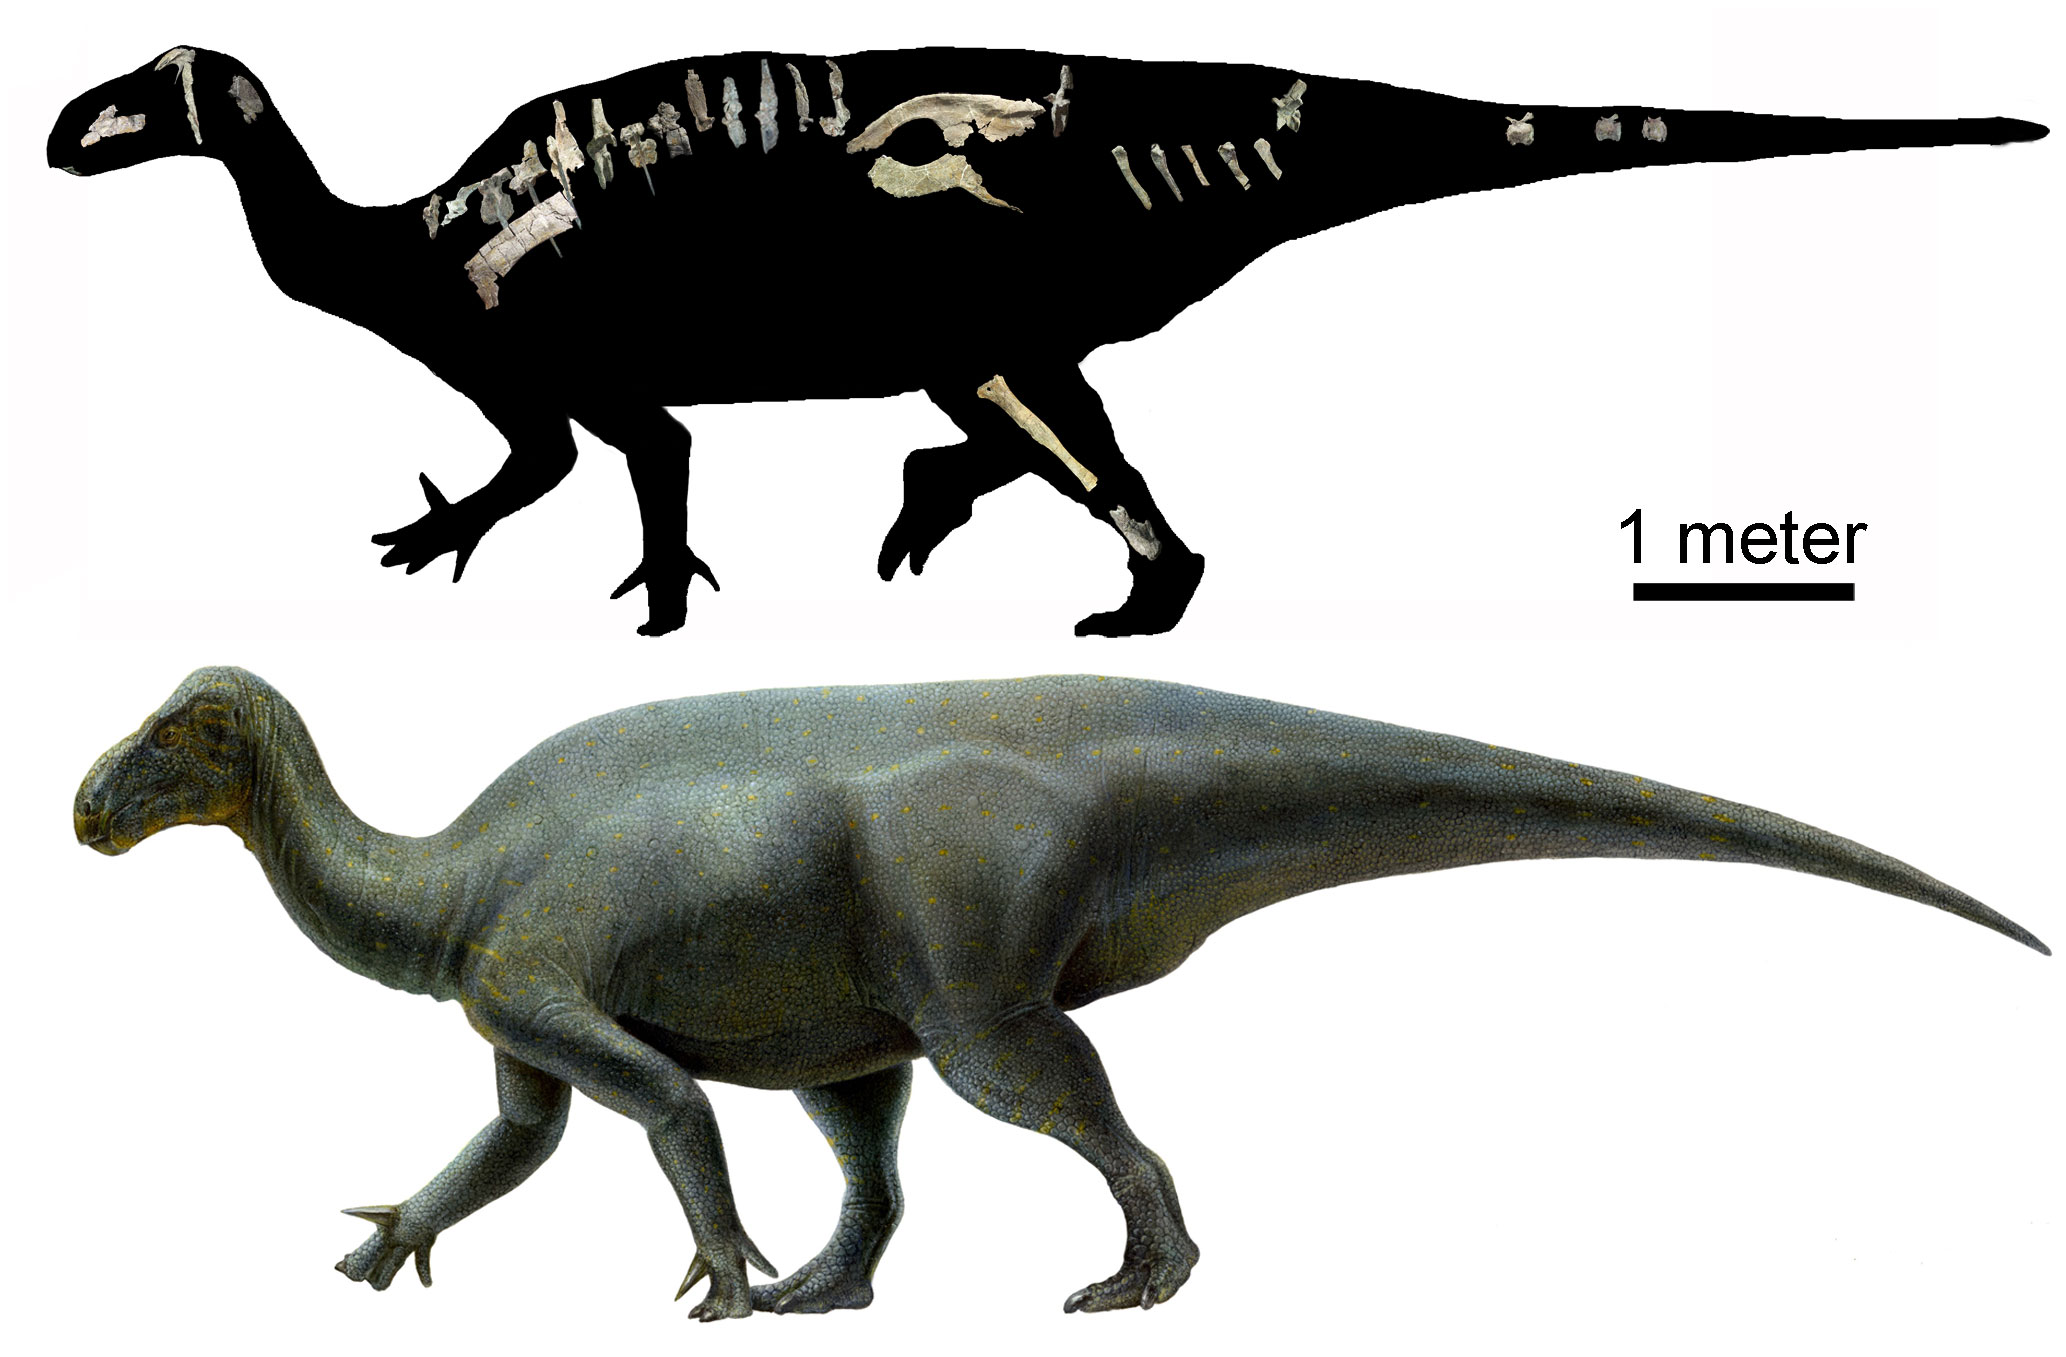 2-Panel figure showing illustrations of the hadrosuar (duck-billed dinosaur) Iguanacolossus from the Early Cretaceous of Utah. Panel 1: Silhouette of the animal with real bones superimposed in their life positions. Few bones were found, including some from the skull, the hind leg, the spine, the pelvis, the tail, and the shoulder. Panel 2: Reconstruction of the living animal. The animal is shown walking on four legs with tail extended straight backward off the ground. The neck is relatively long, the head is slightly elongated, and the mount is somewhat beak-like. The front feet has "thumbs" that look like spikes.